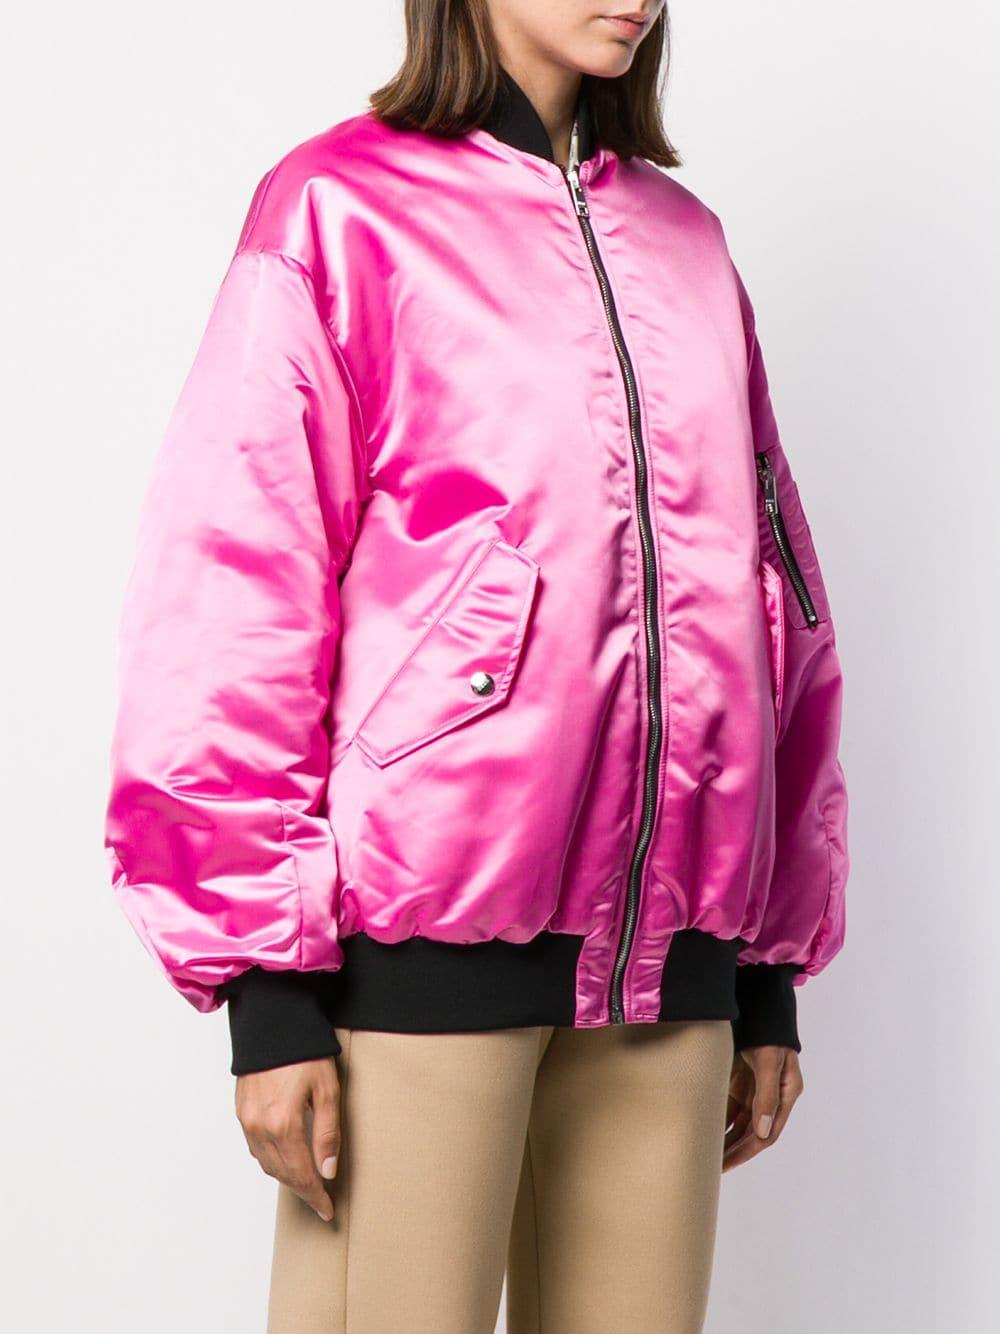 MSGM Synthetic Embroidered Bomber Jacket in Pink | Lyst